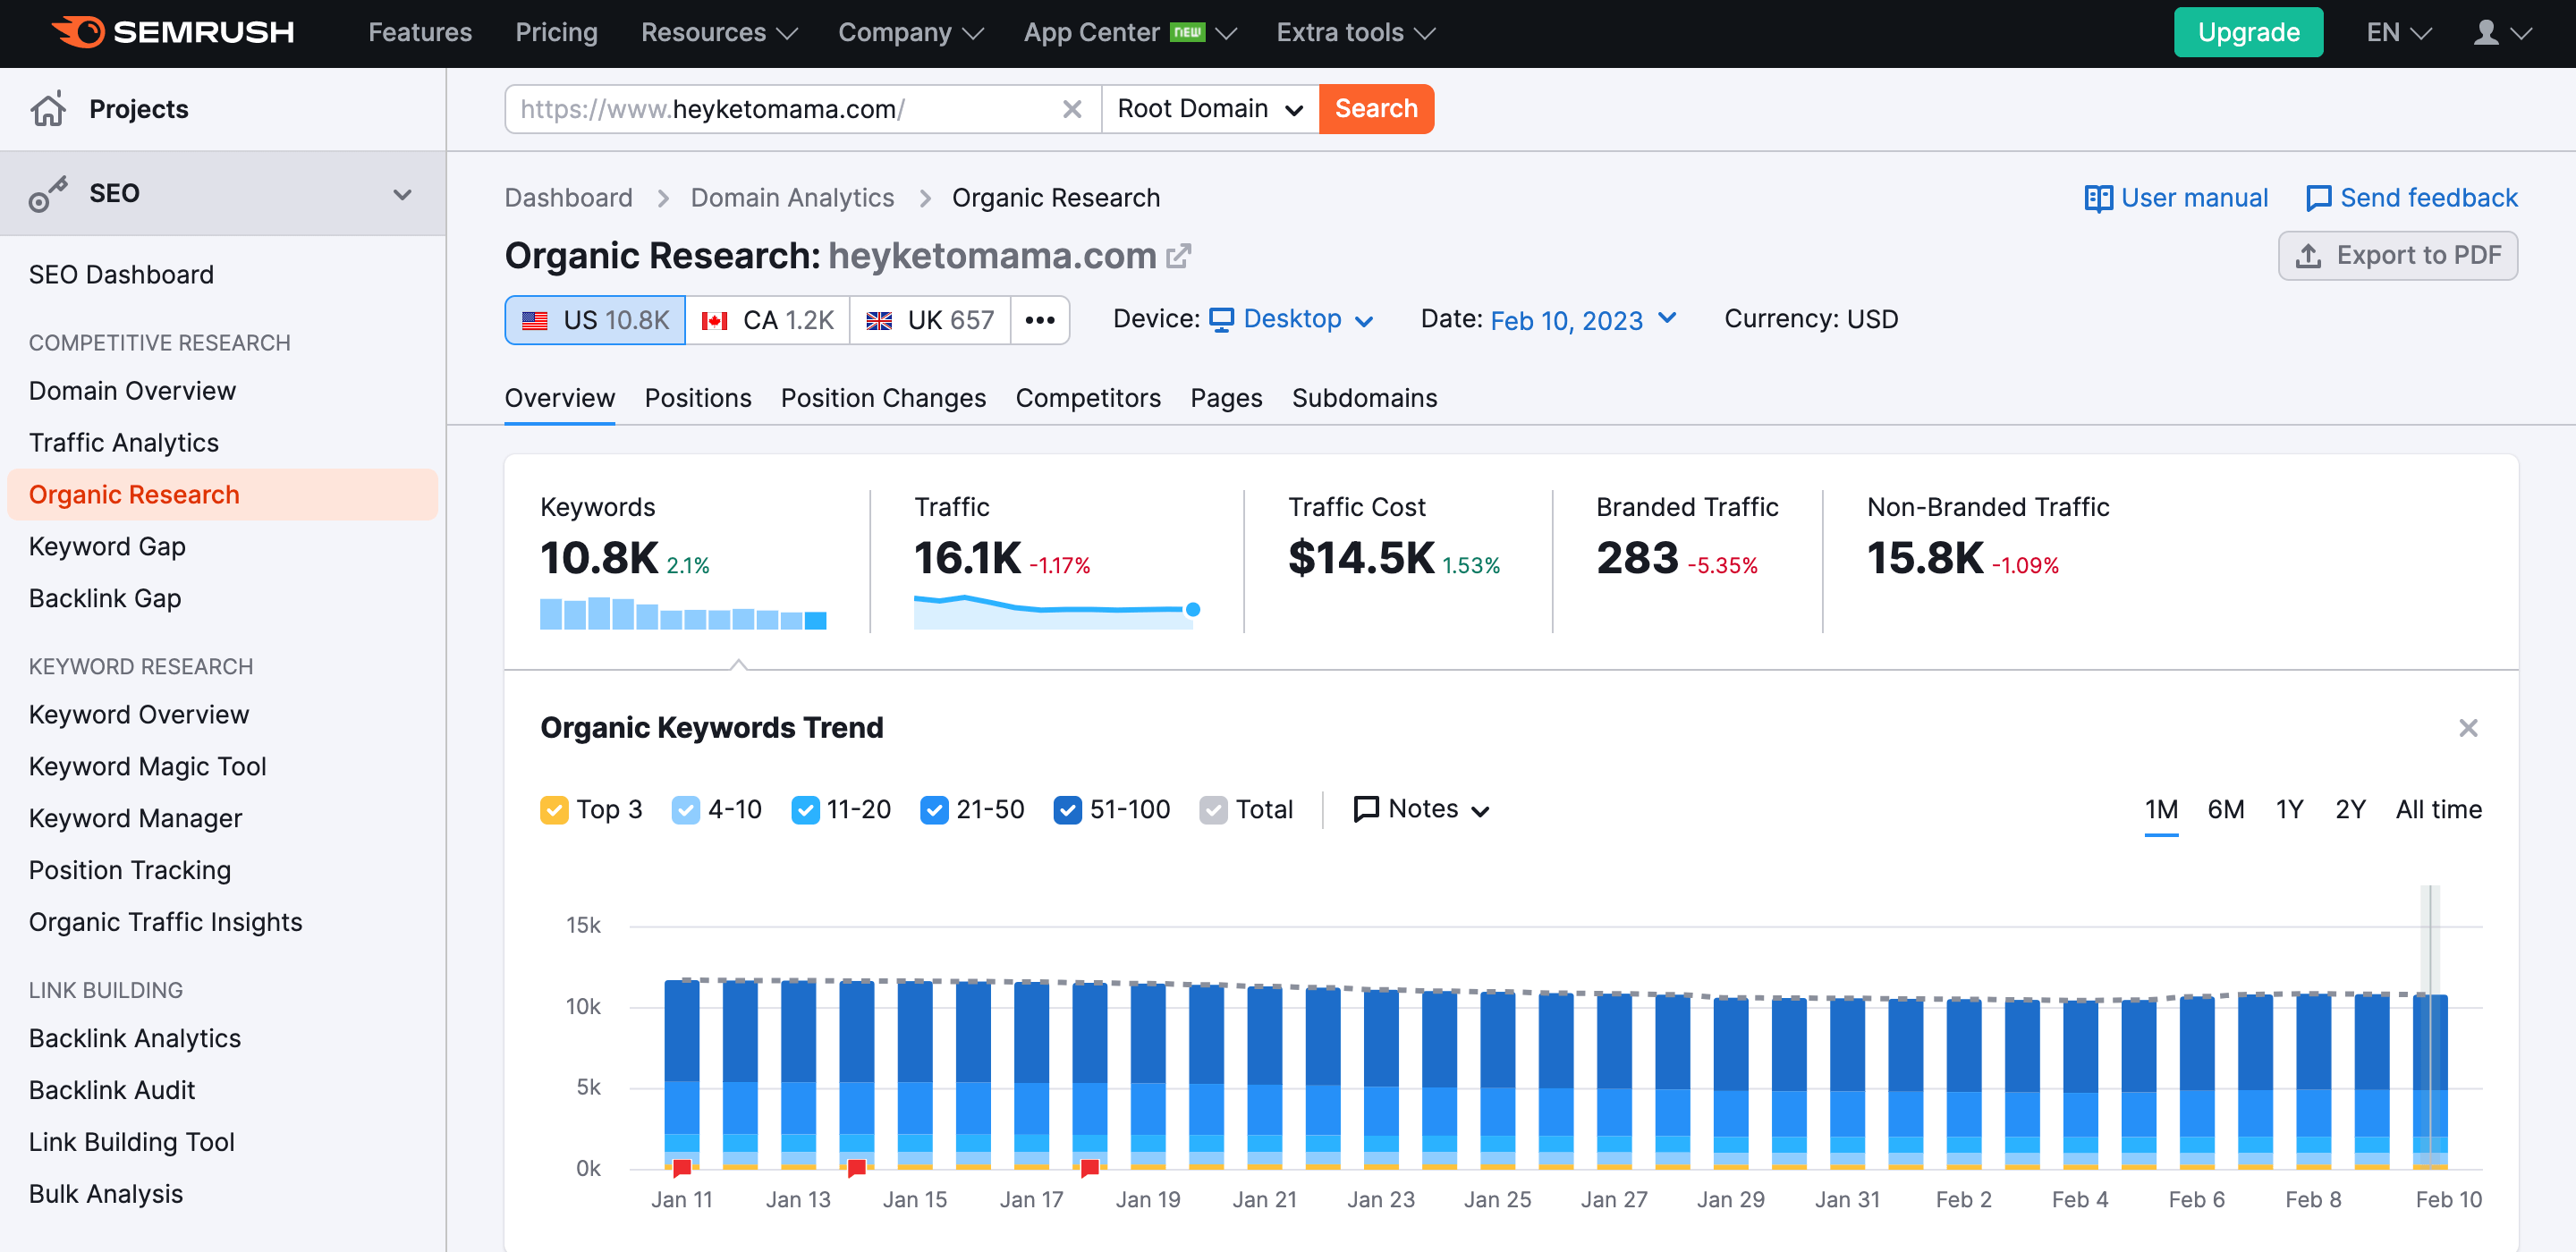 A competitor analysis report by Semrush